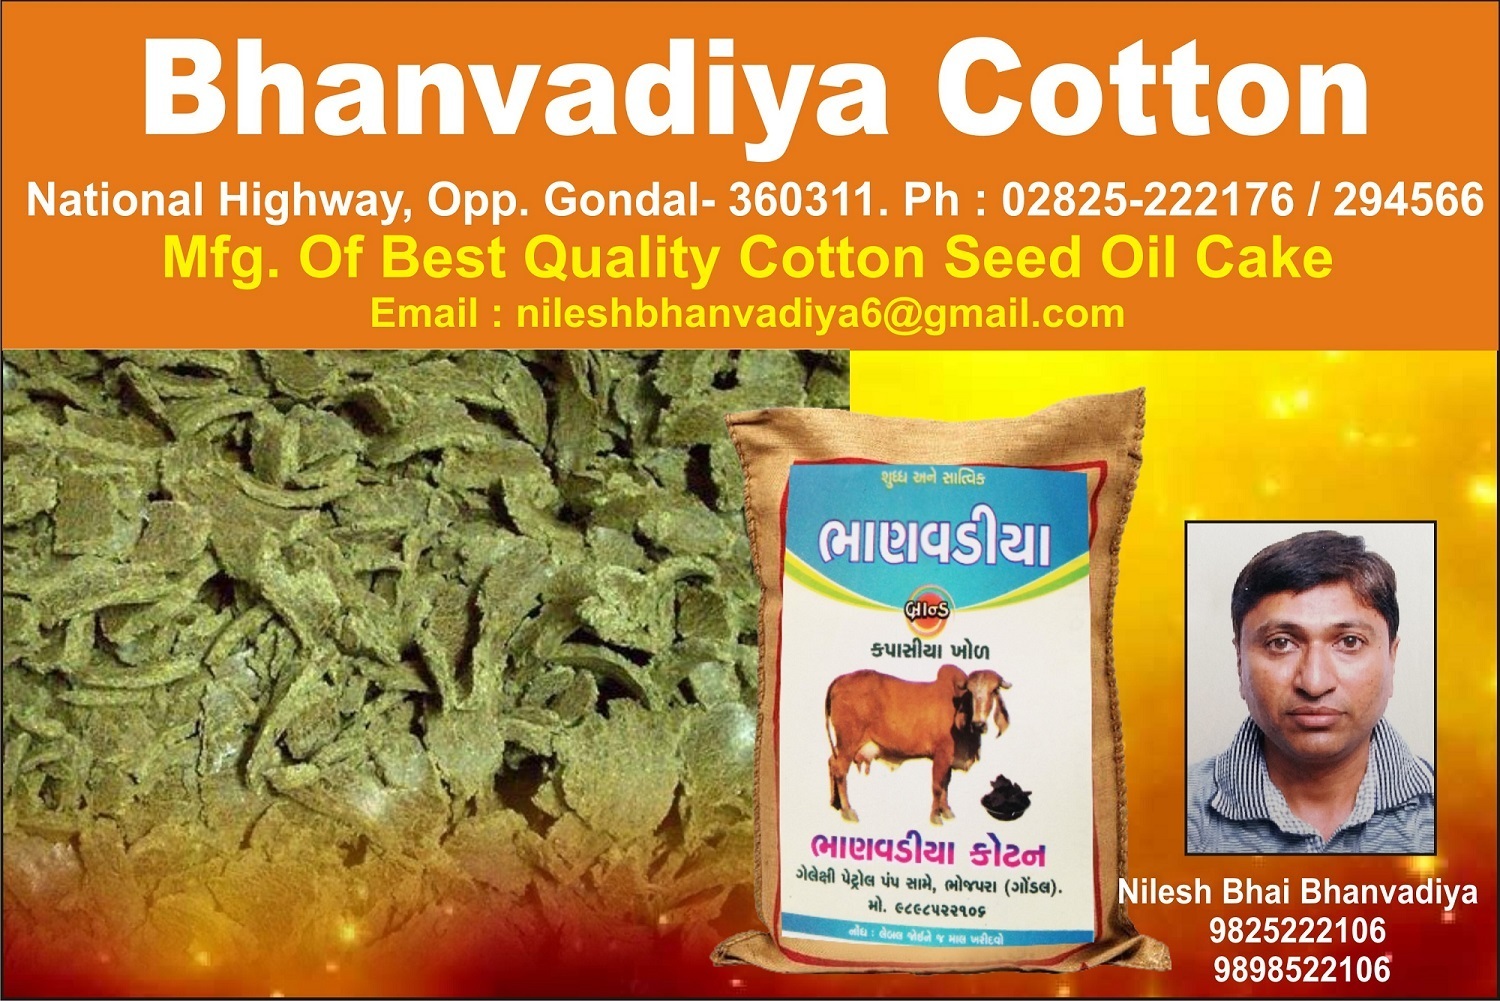 Bhanvadiya Cotton - Manufacturer Of Cotton Seed, Cattle Feed And Cotton Oil Mill